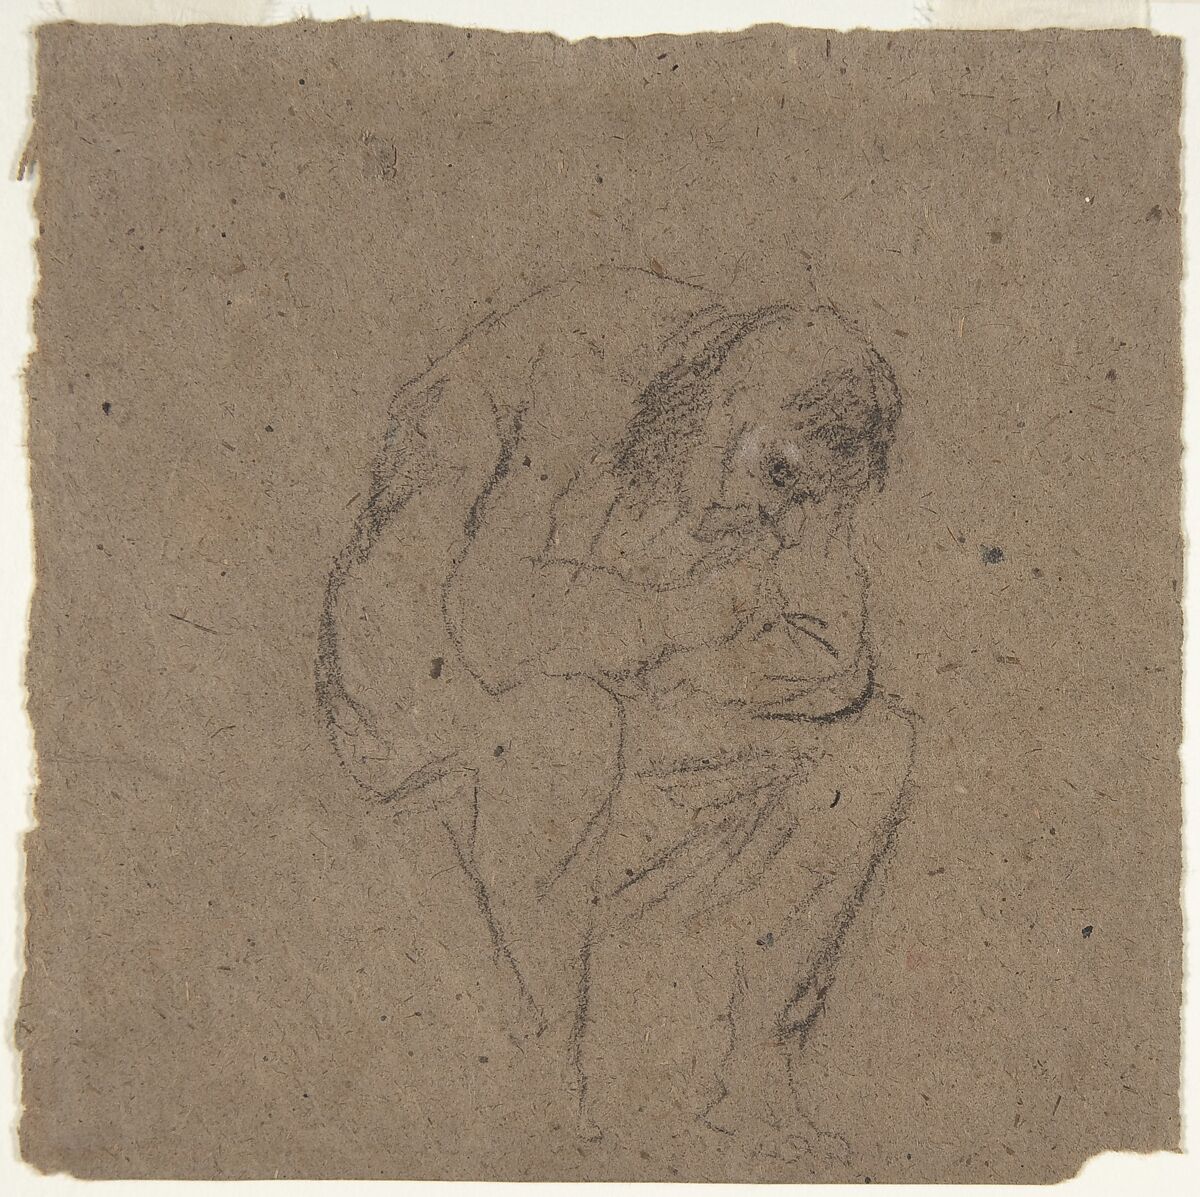 Study for Ugolino, Jean-Baptiste Carpeaux (French, Valenciennes 1827–1875 Courbevoie), black chalk on brownish paper 